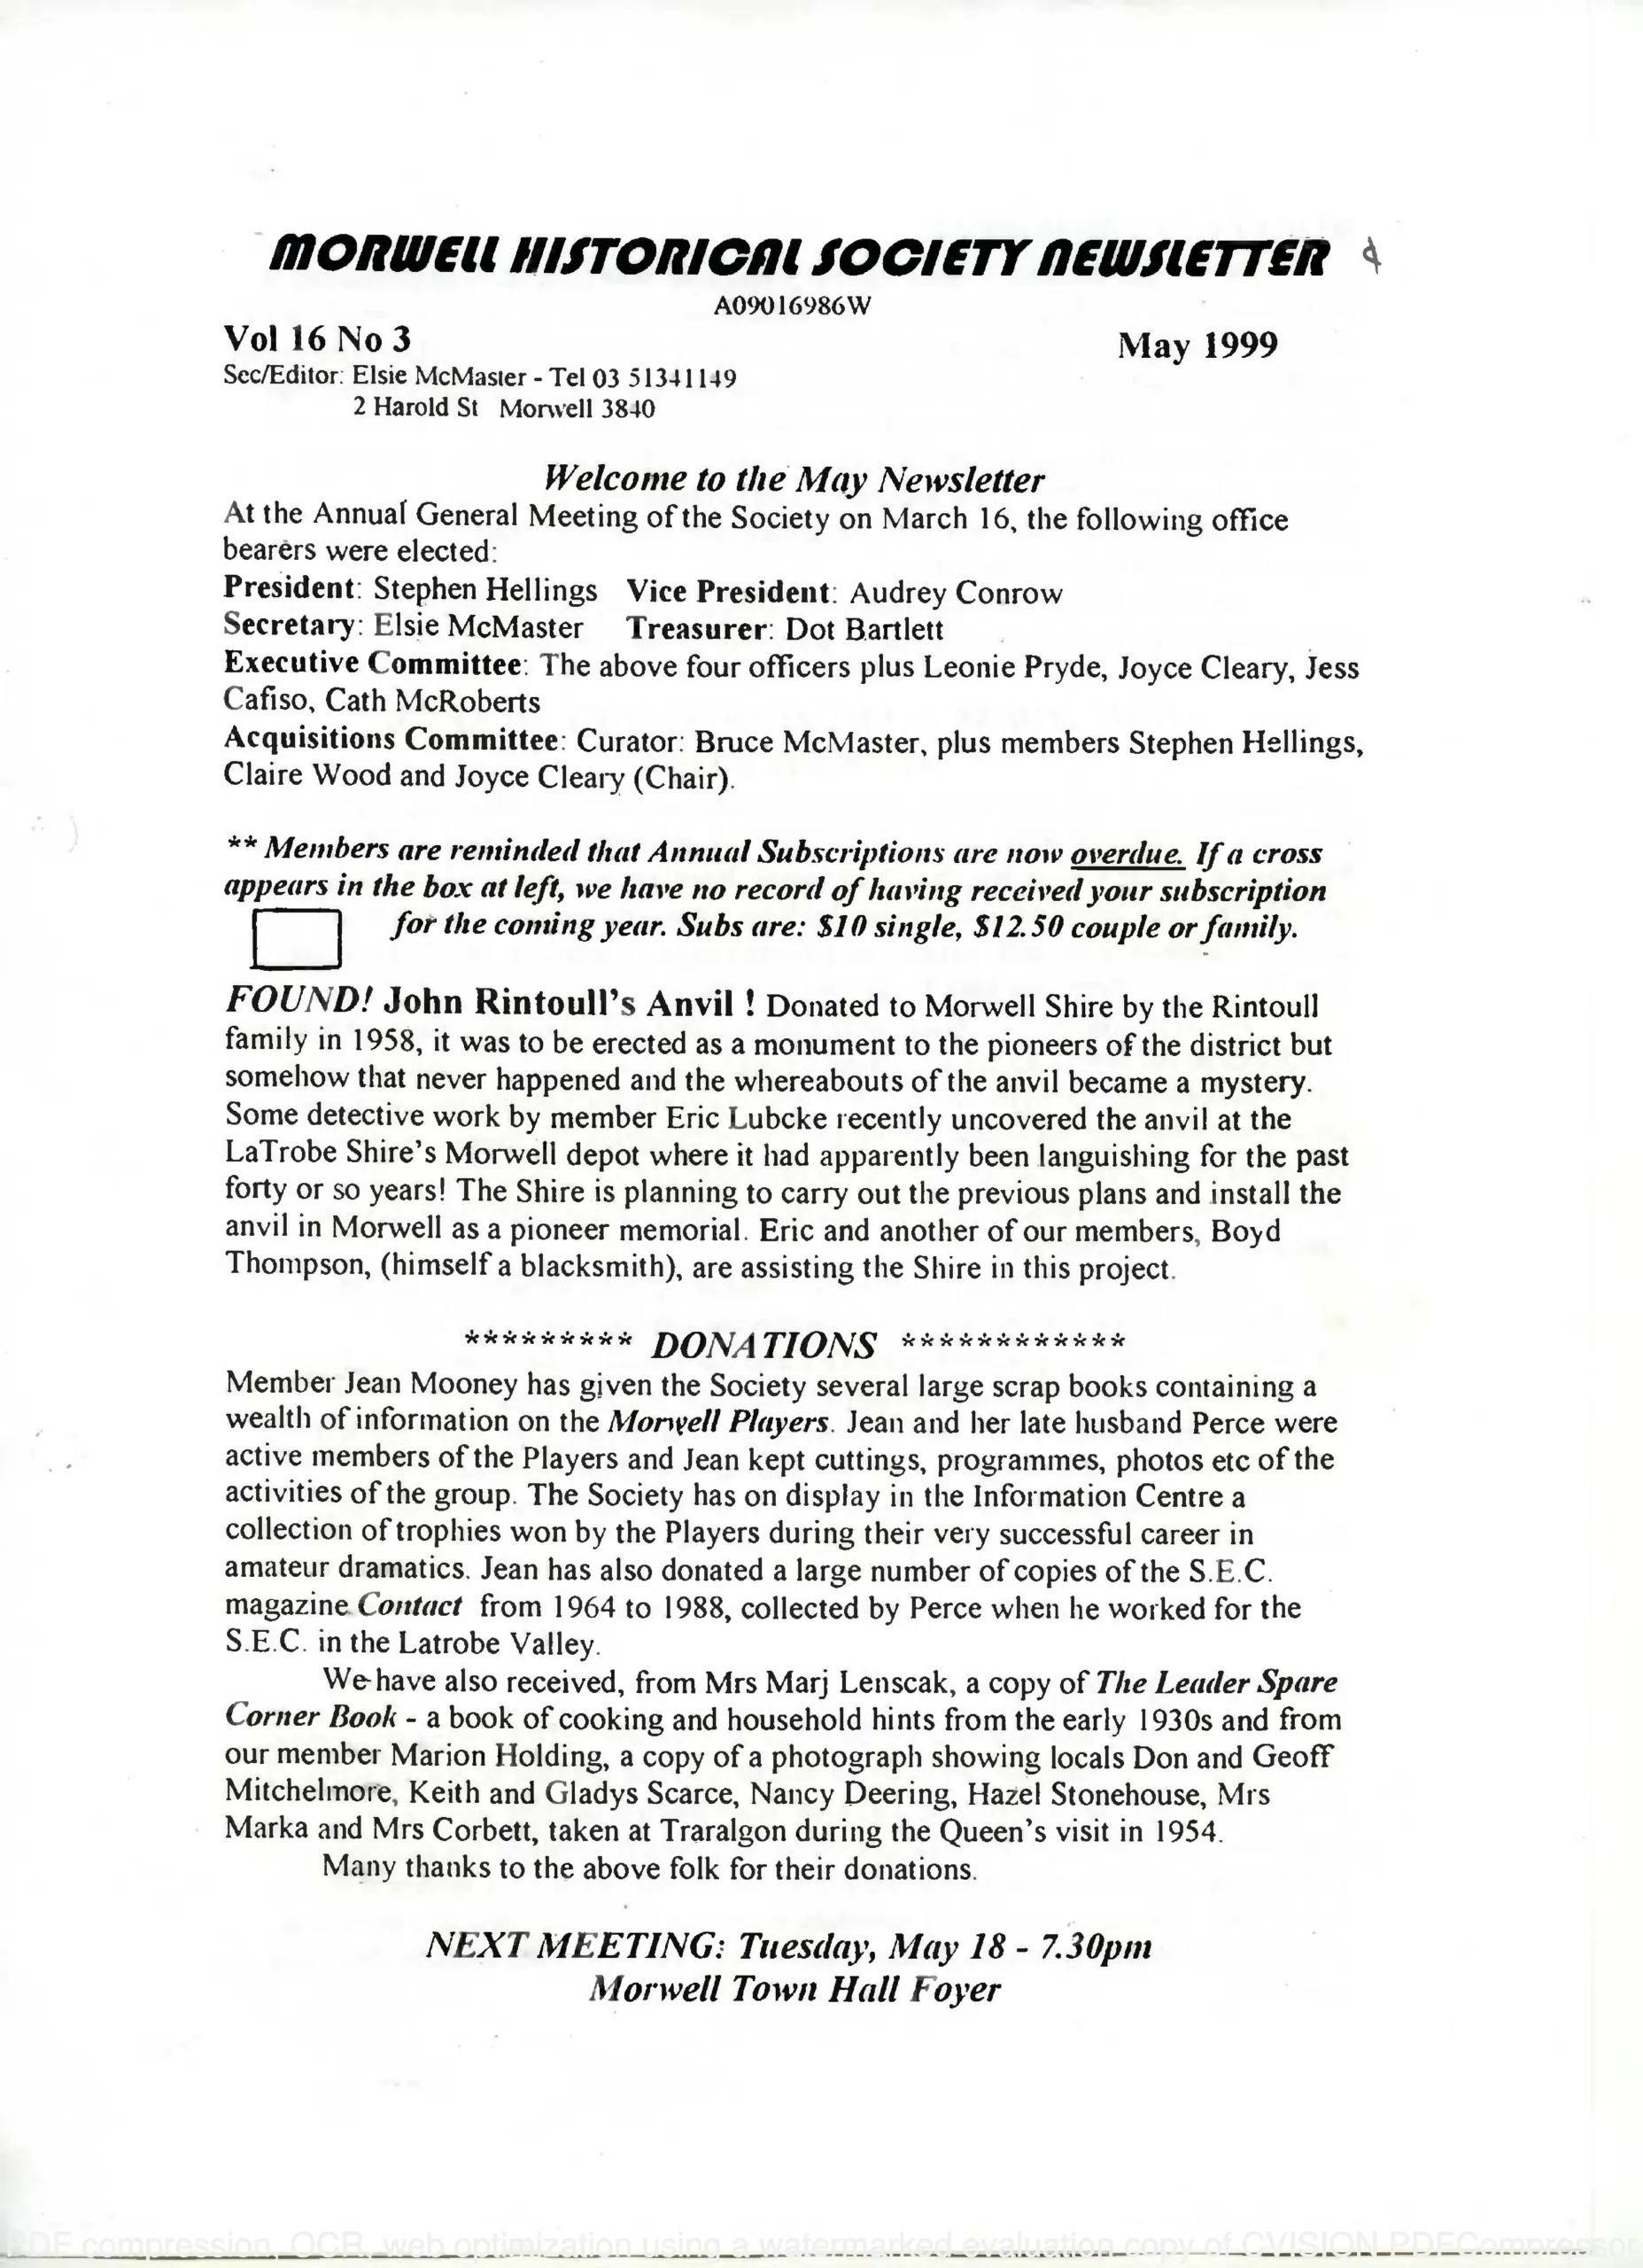 Newsletter May 1999